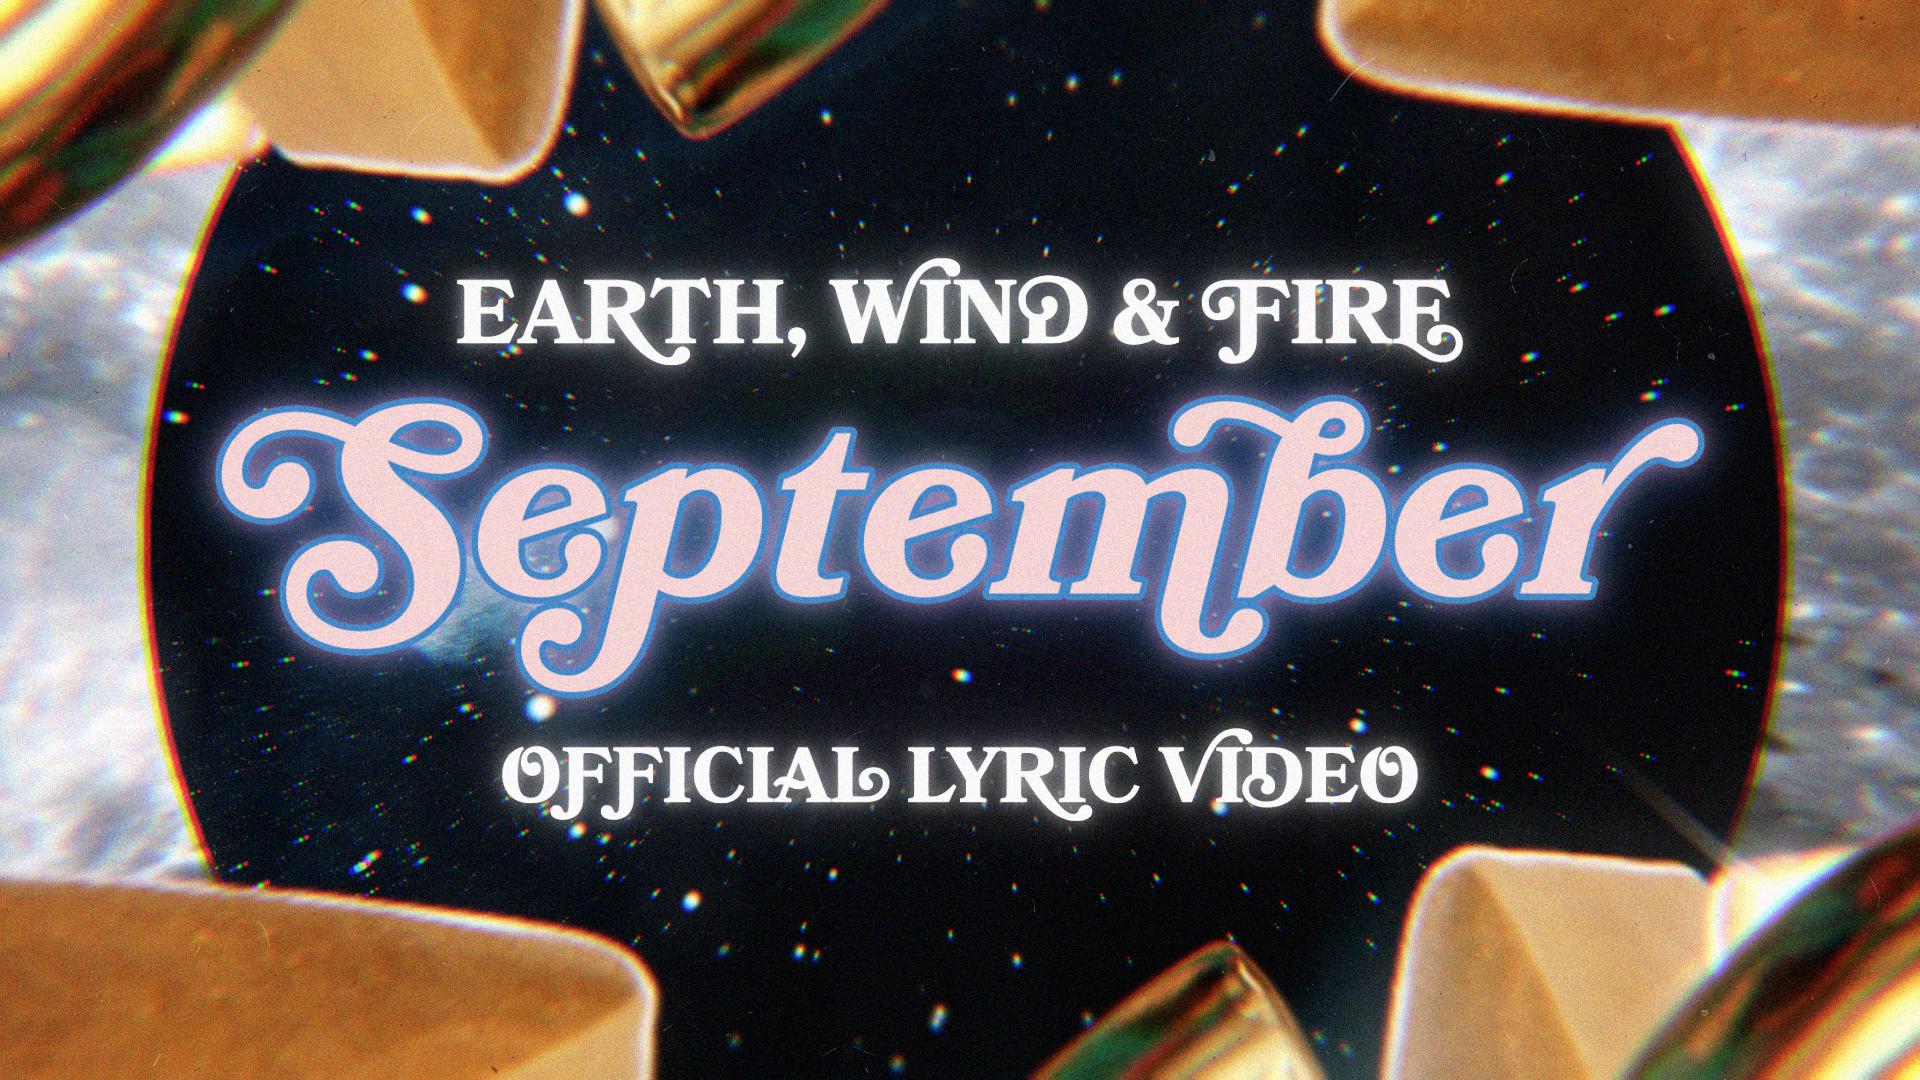 Earth, Wind & Fire - September (Official Lyric Video)